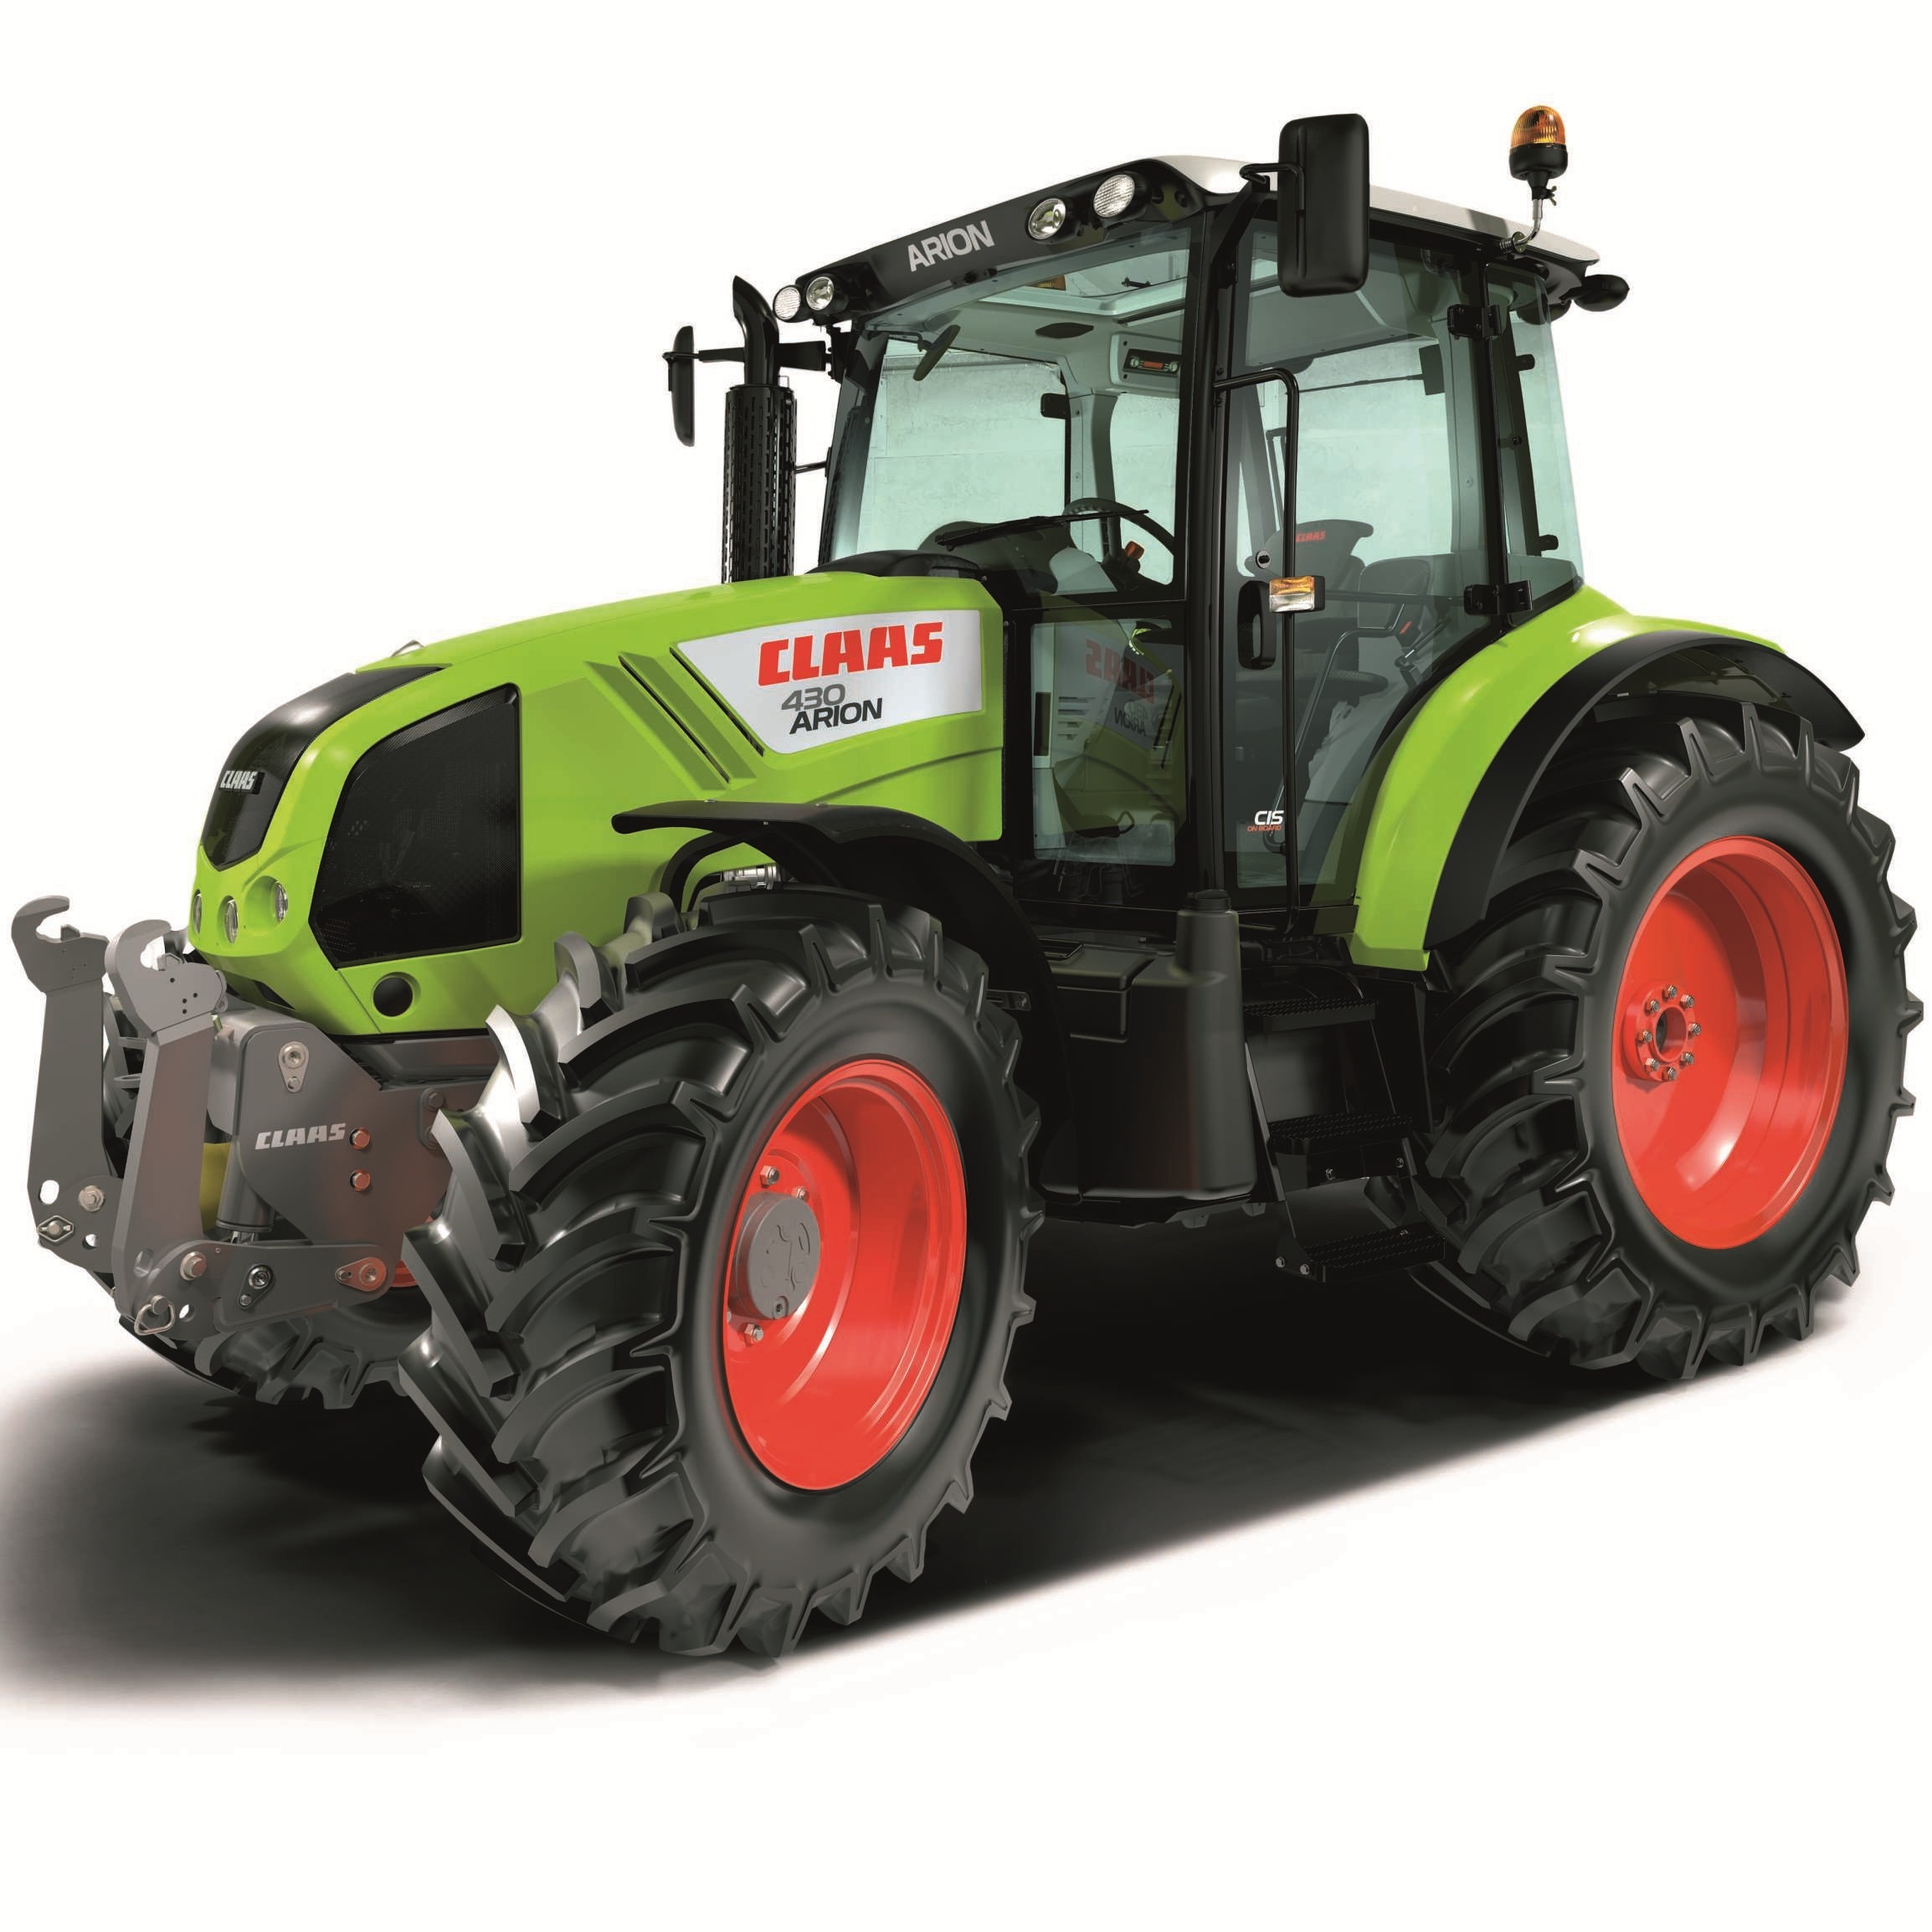 Fichiers Tuning Haute Qualité Claas Tractor Arion 420 CIS 4-4525 CR JD z CPM i-EGR 105hp